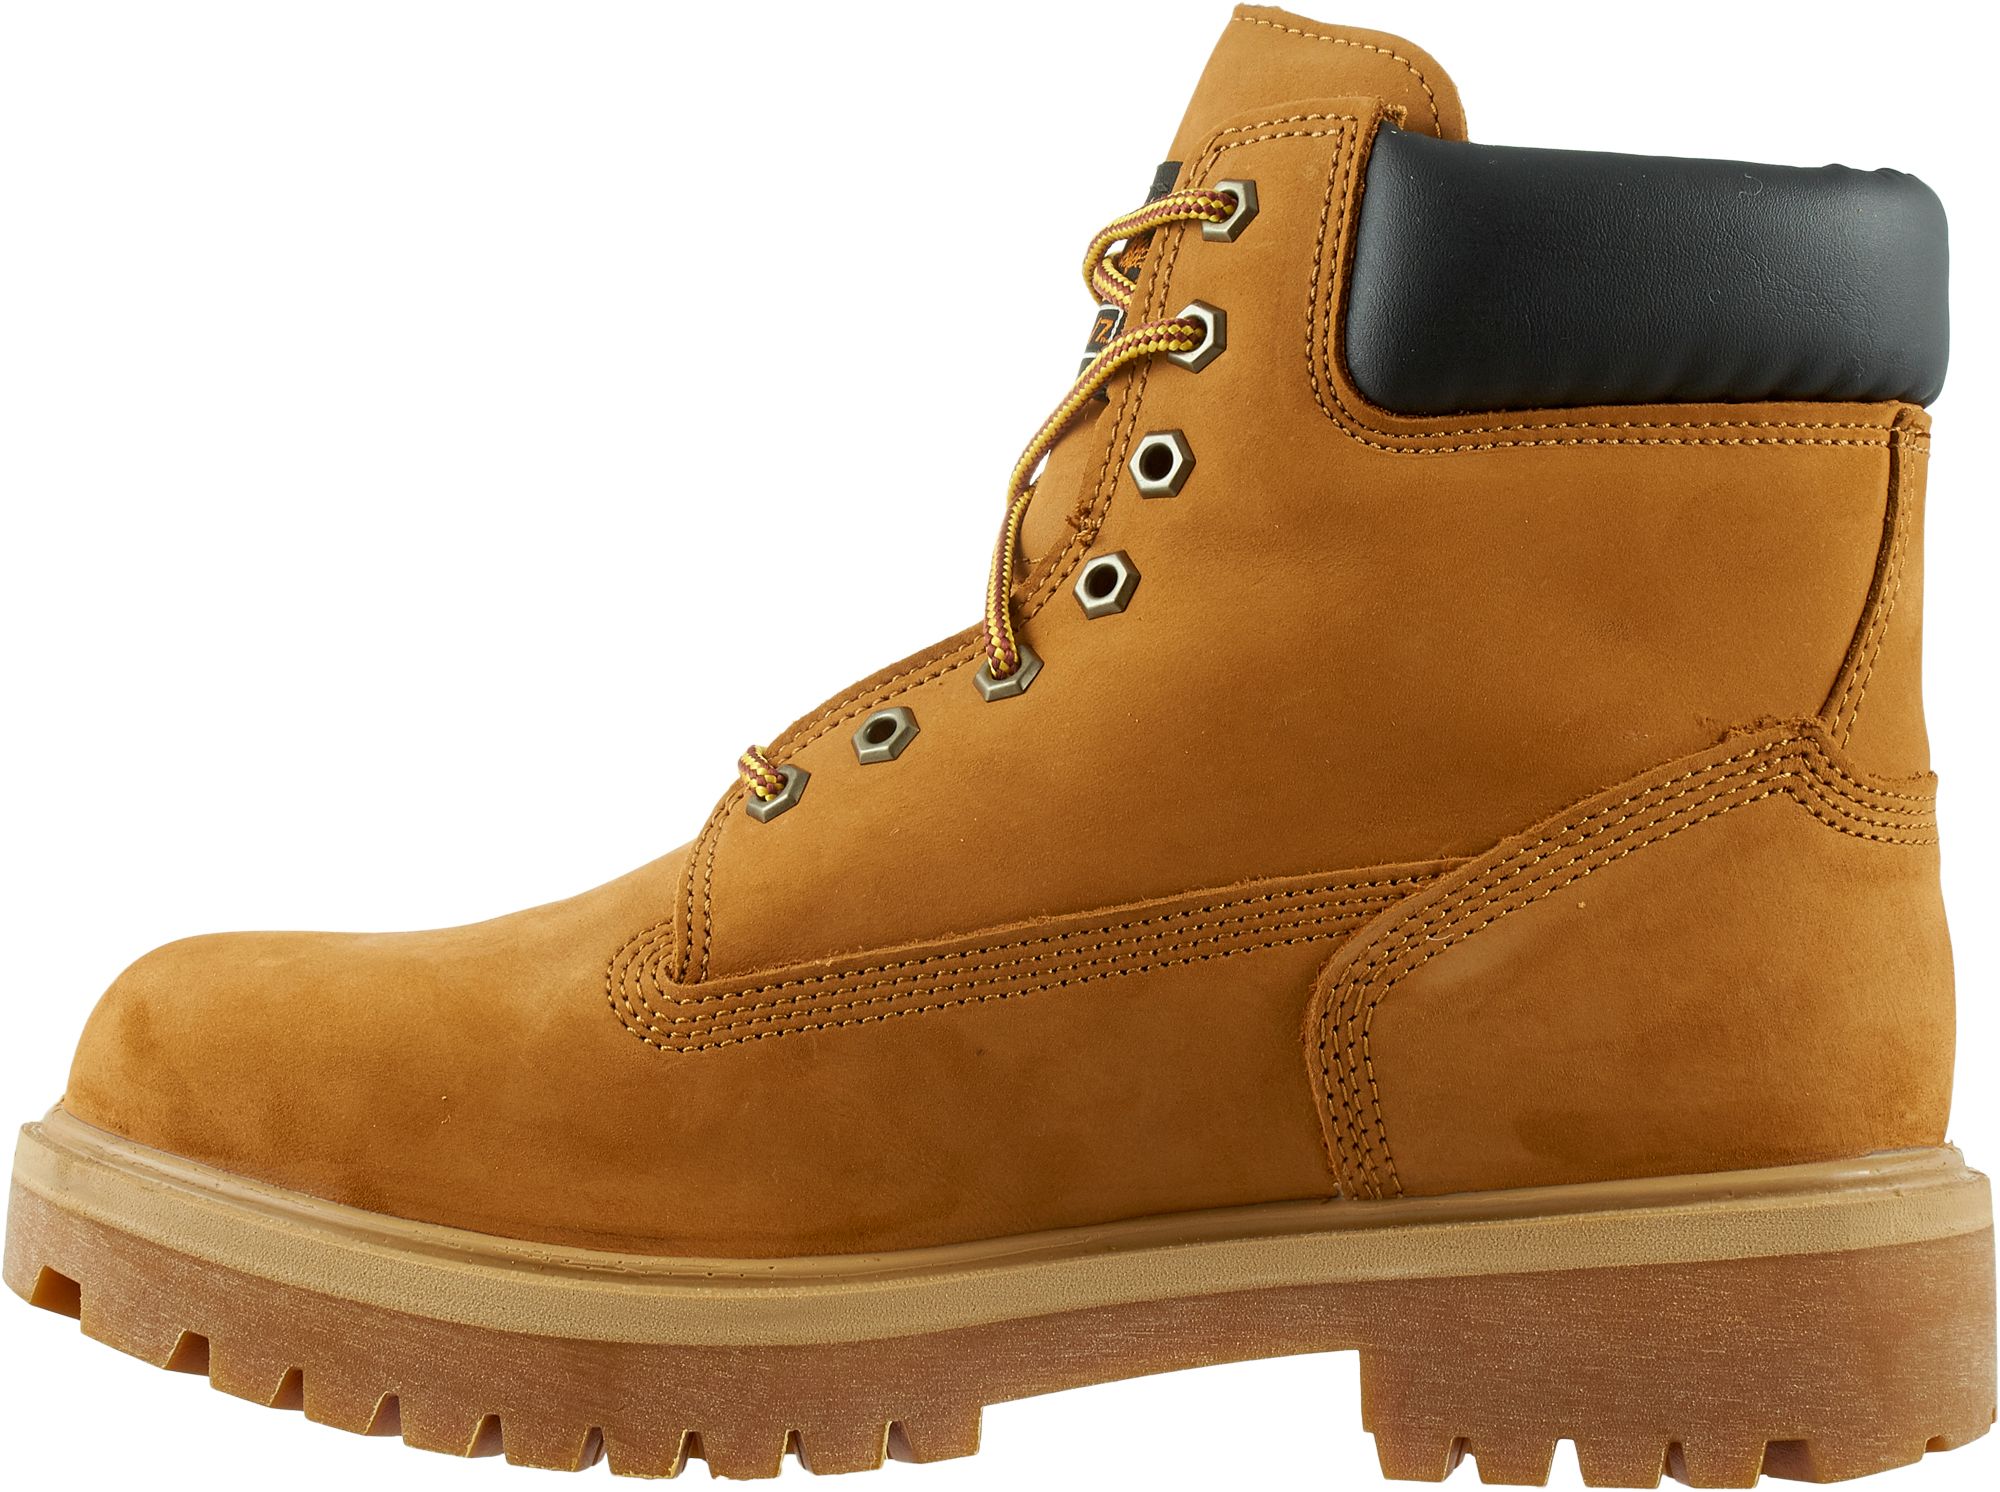 timberland pro direct attach steel safety toe waterproof insulated boot